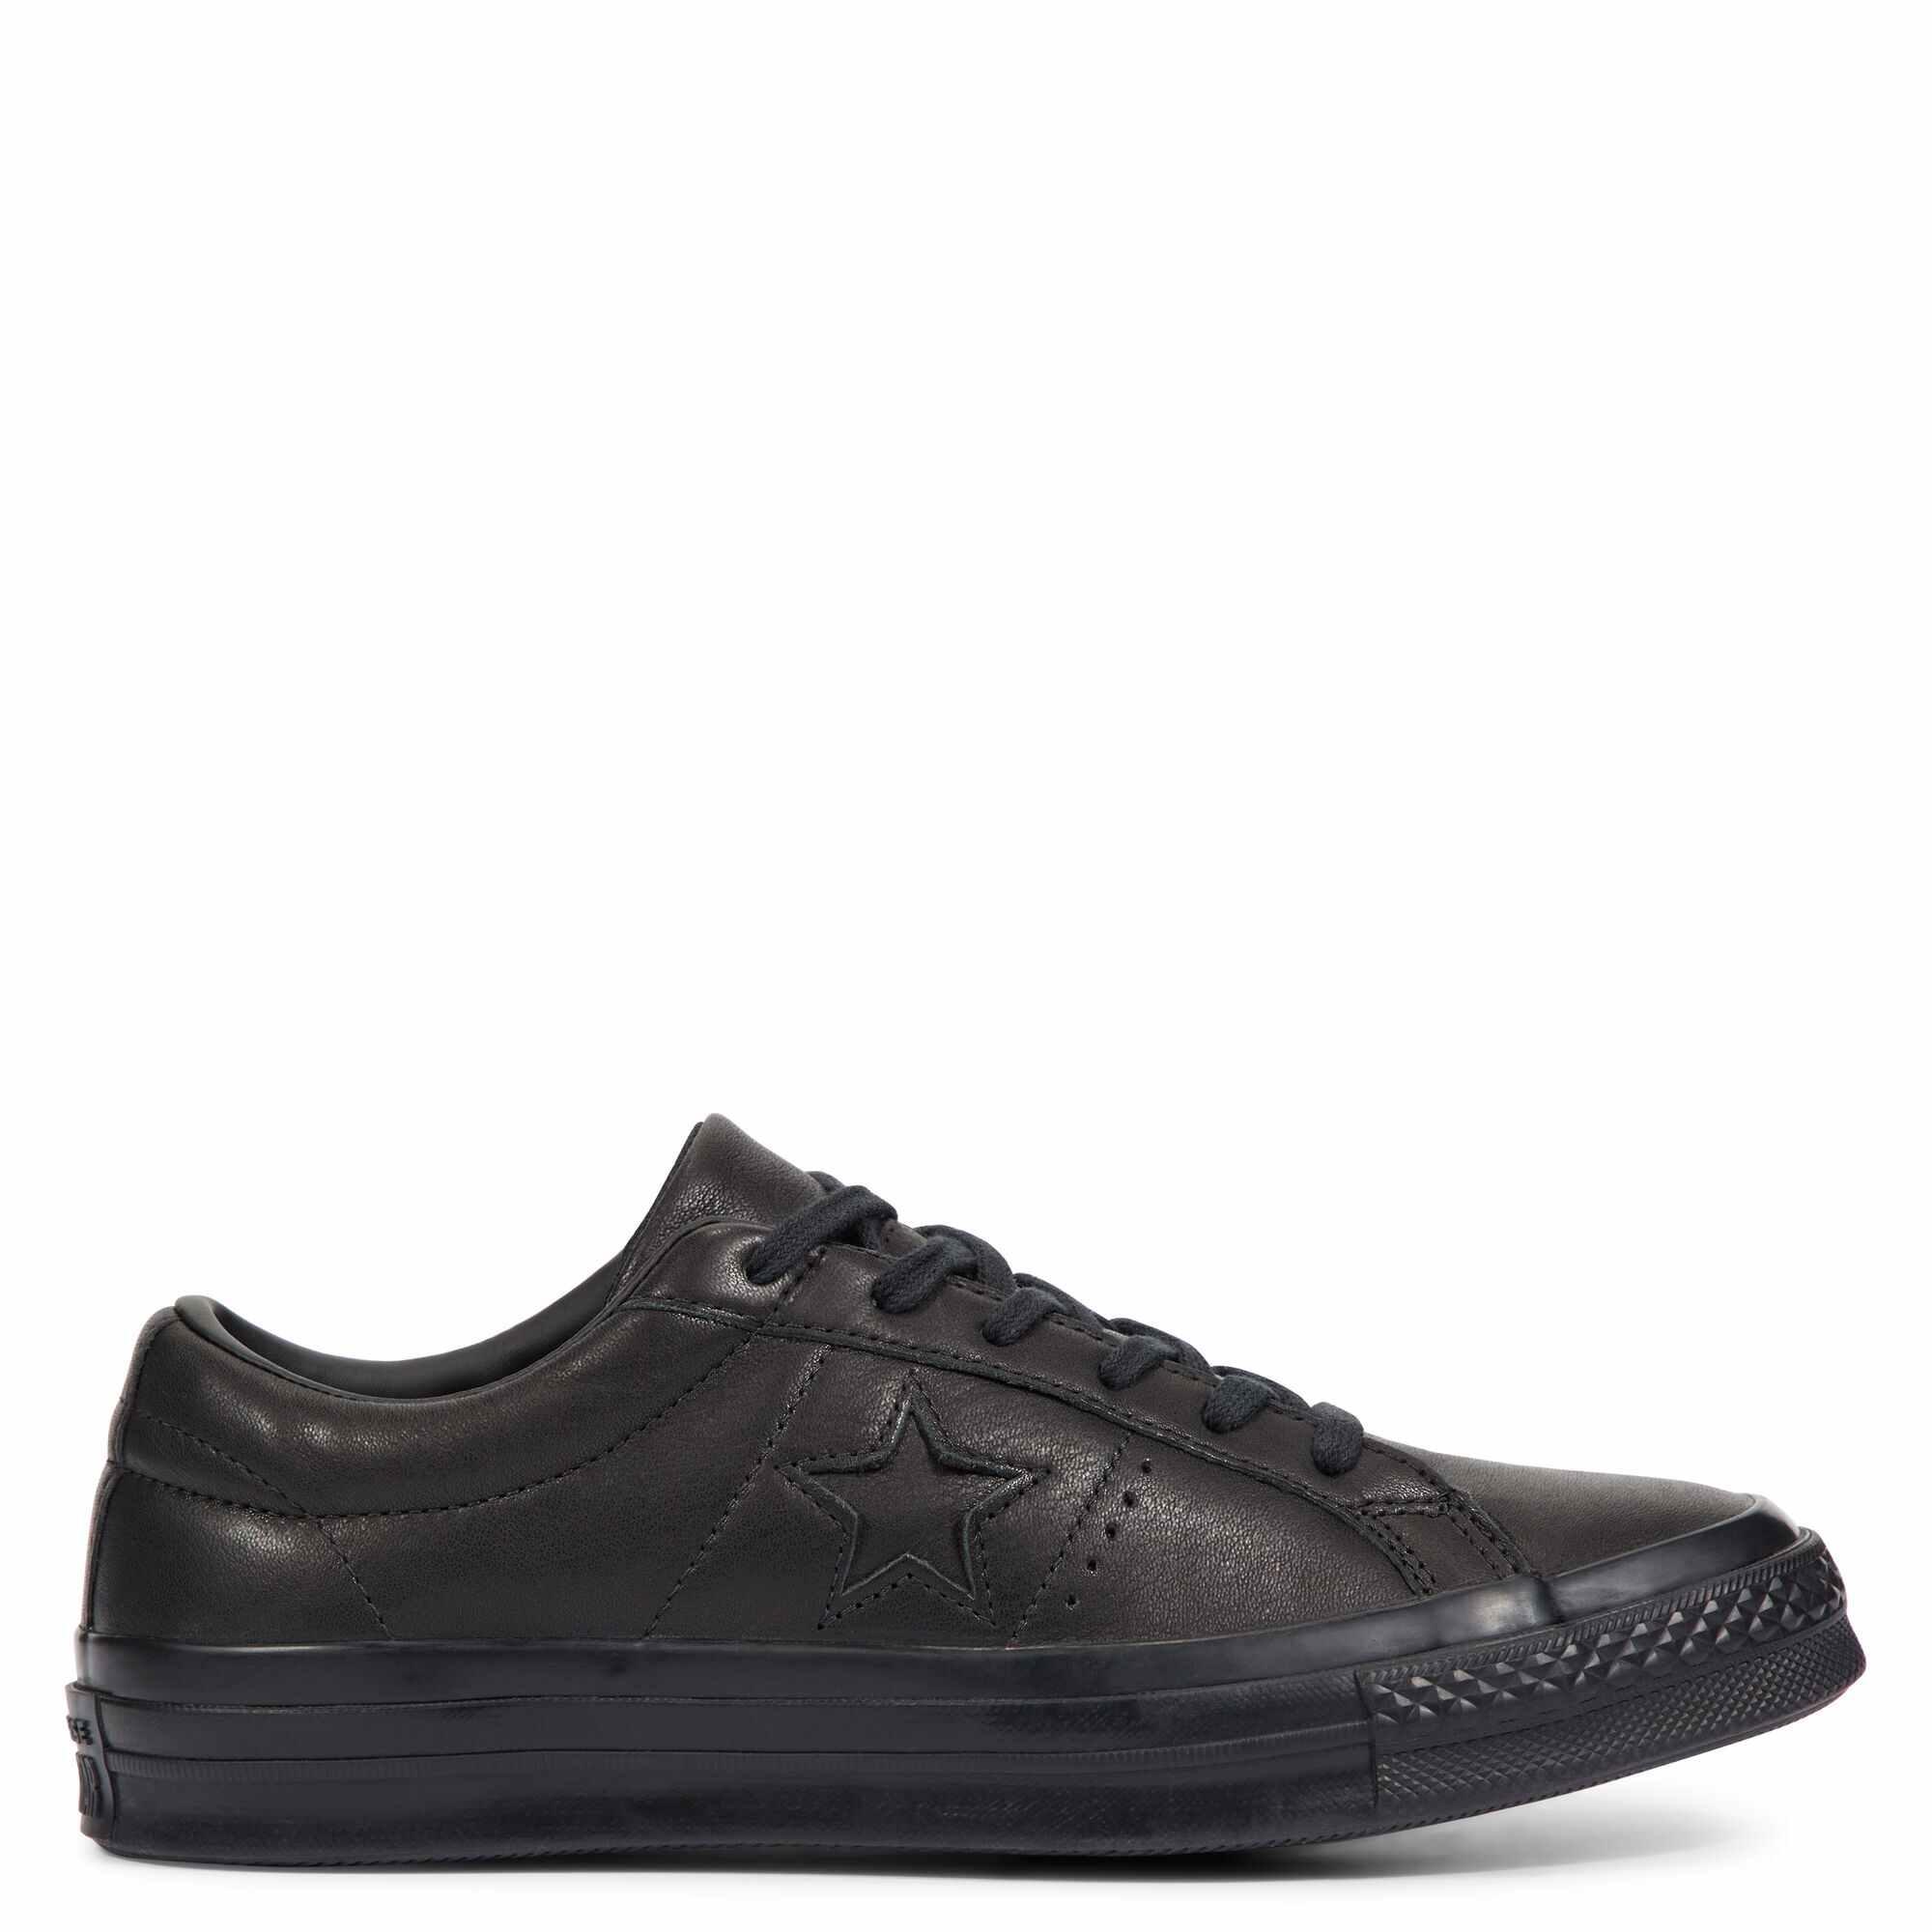 Converse One Star Leather Low Top in 